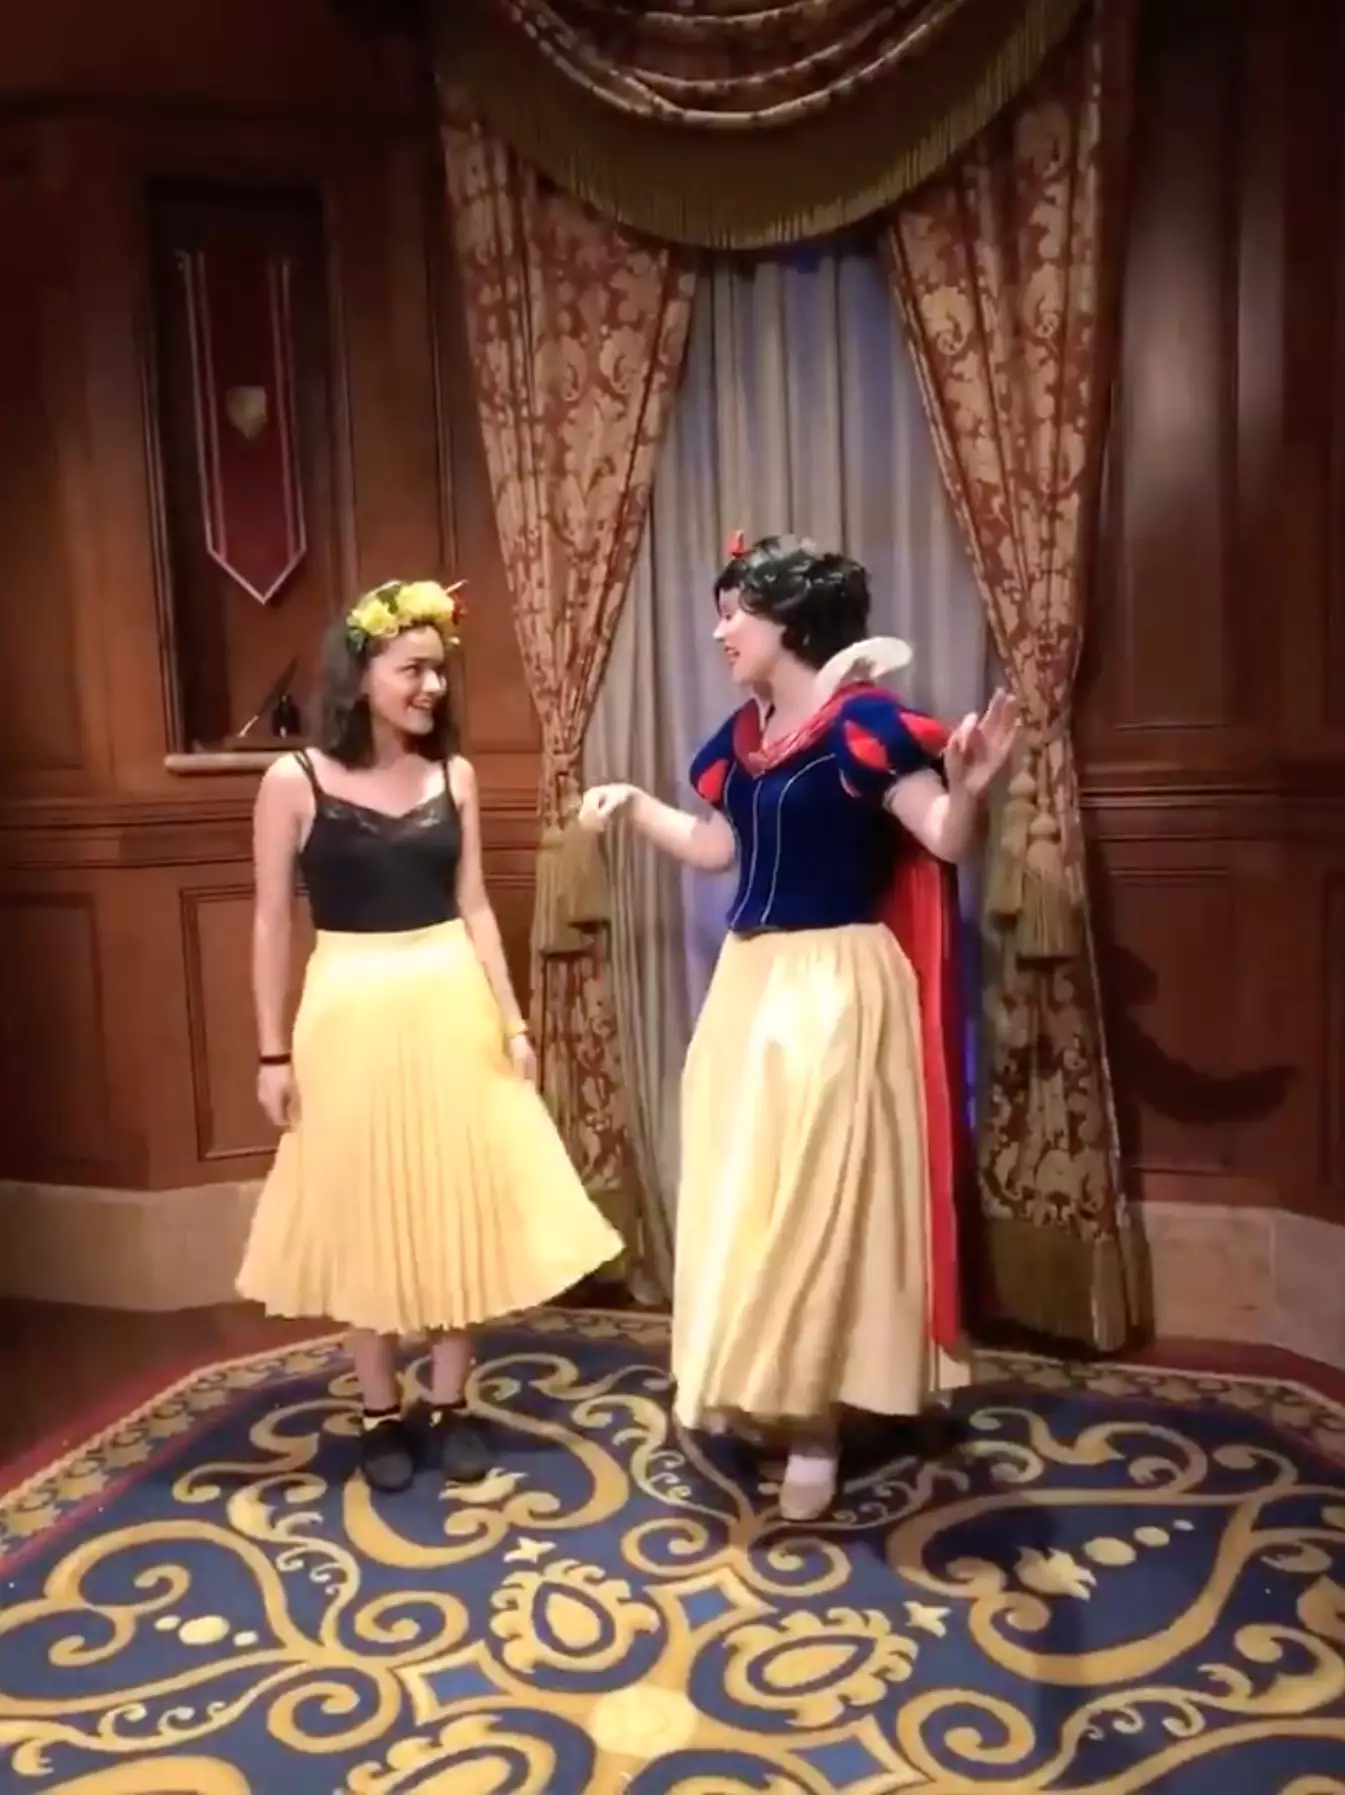 Rachel posted a video from when she met Snow White at Disneyland (